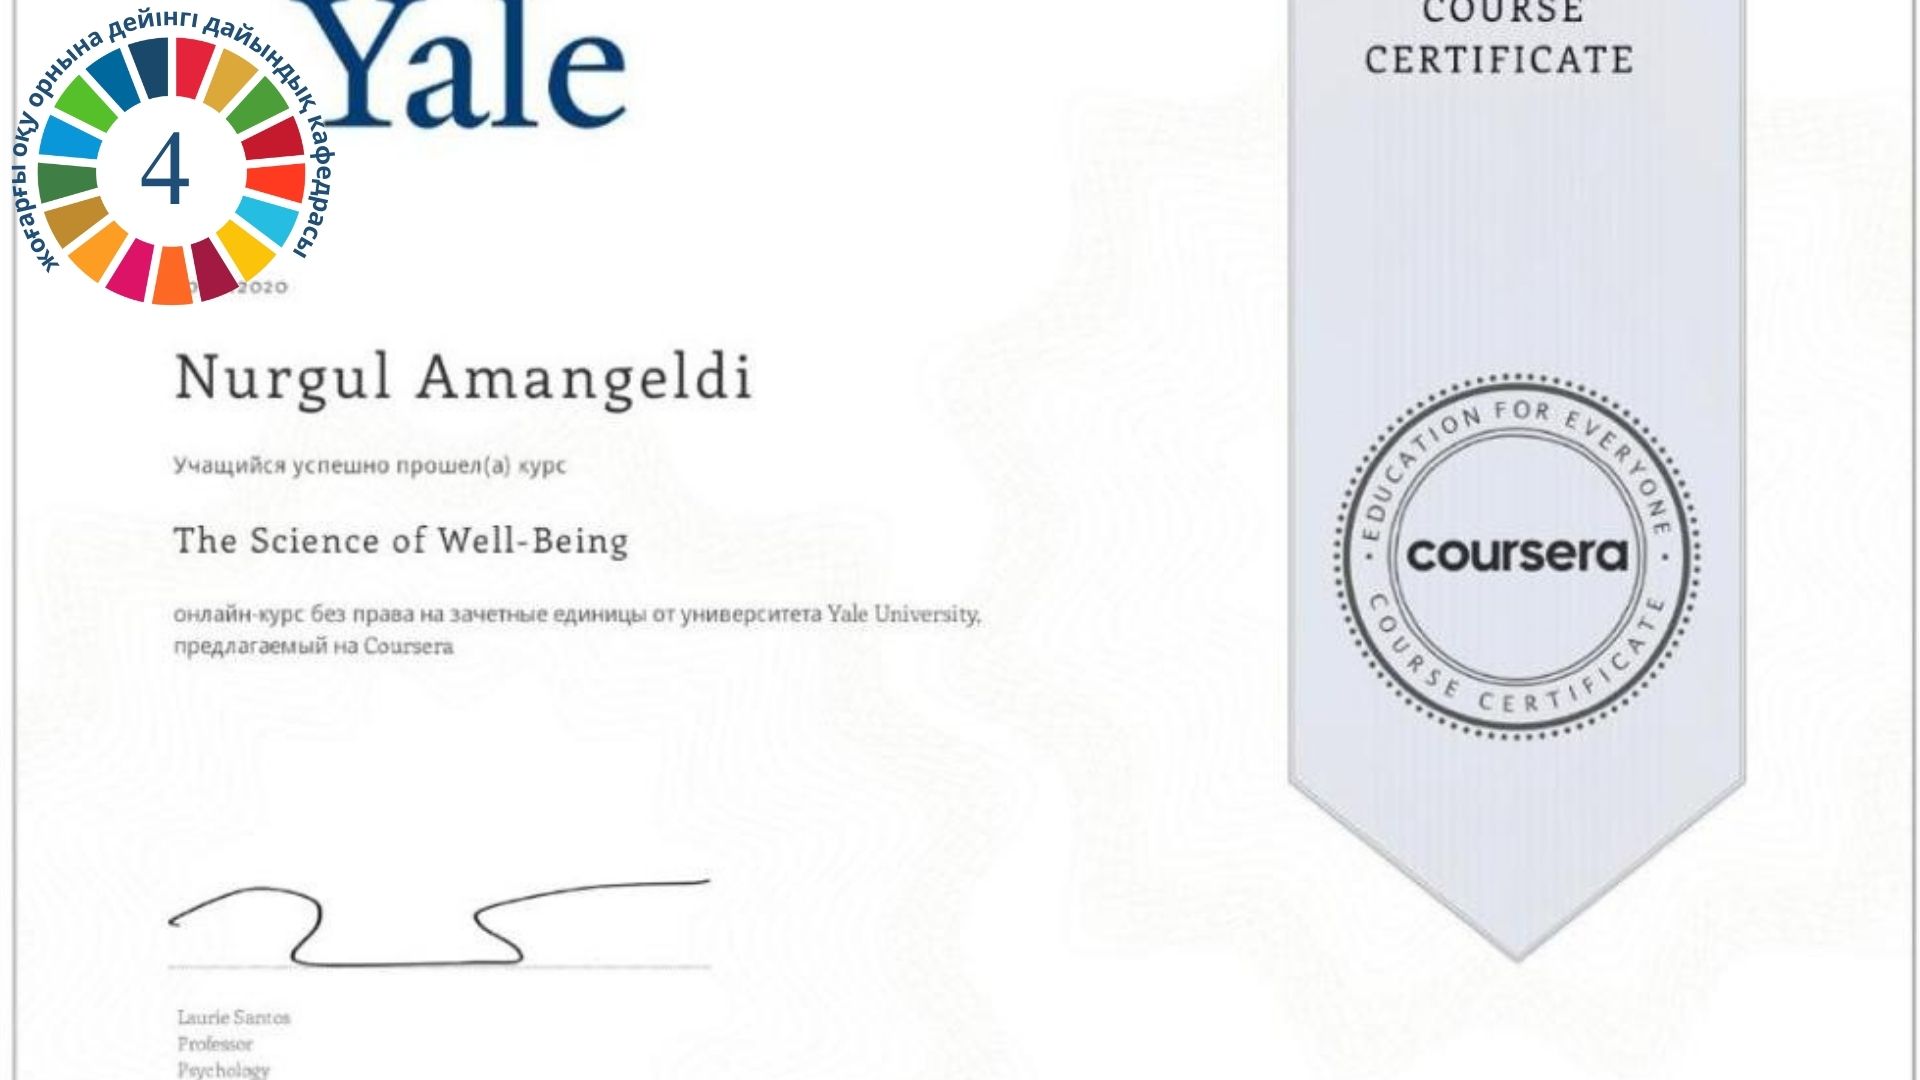 Certificate from Coursera